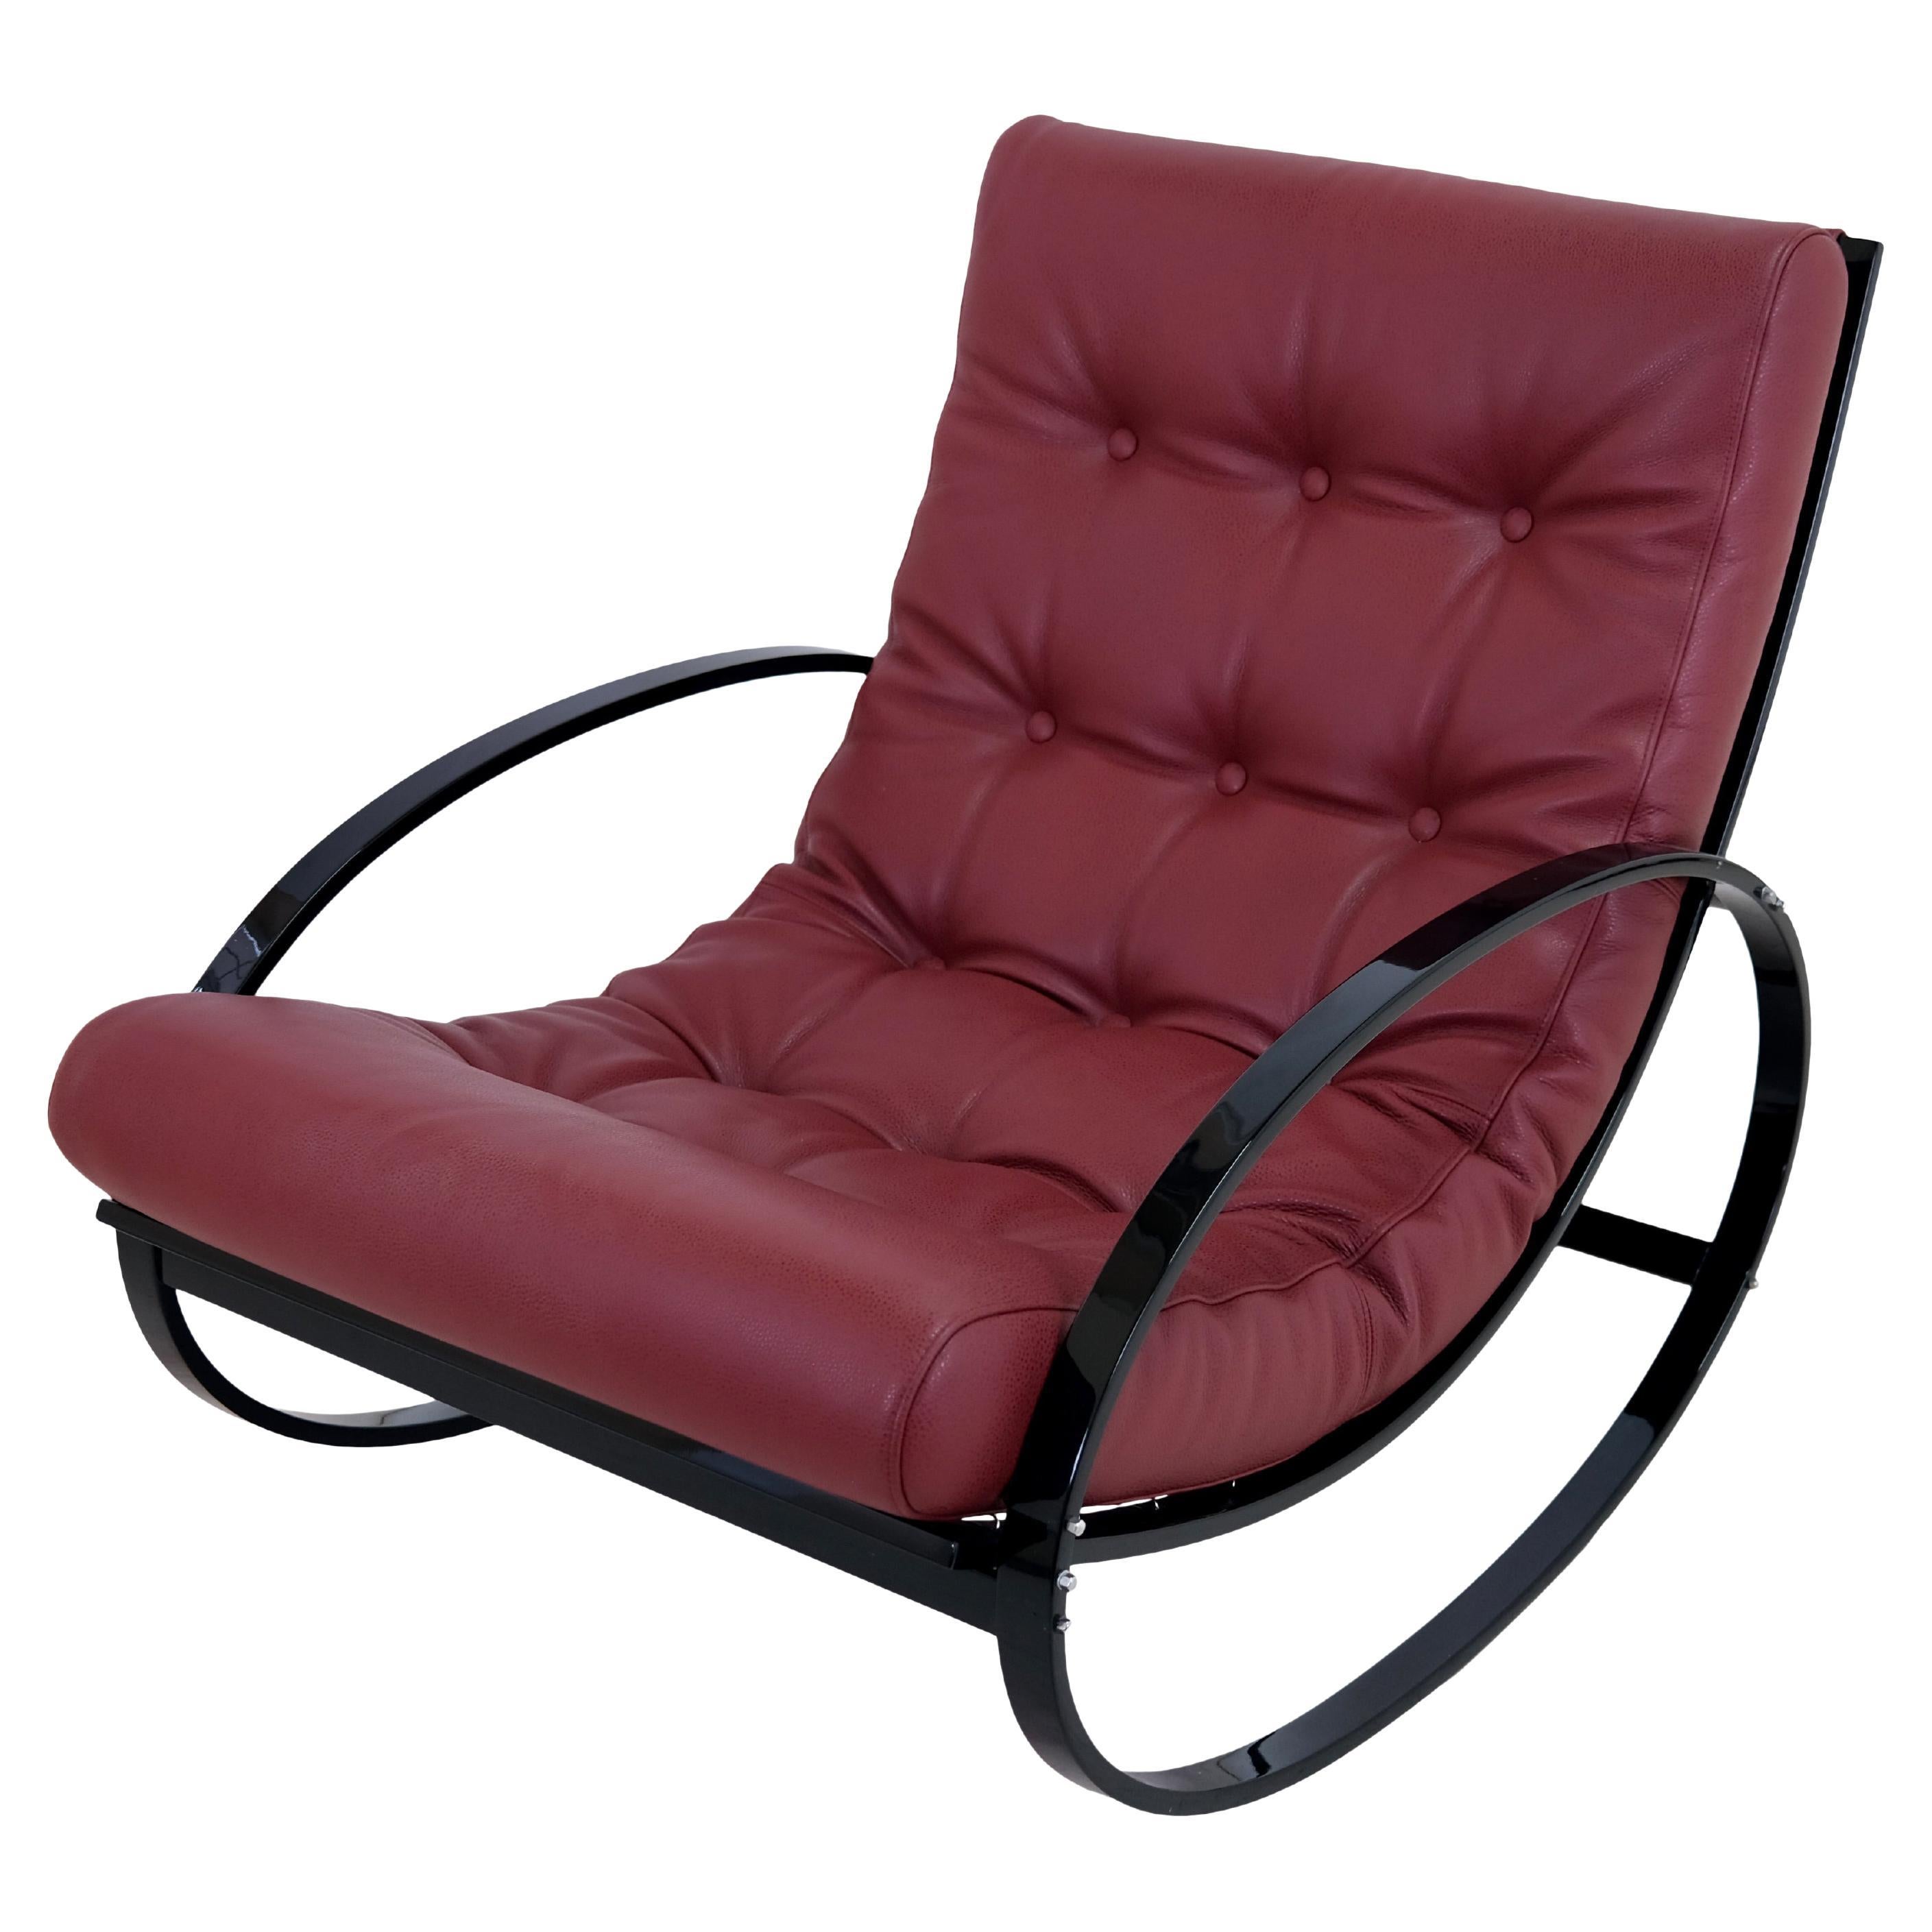 Mid-Century Modern Black Steel Tube Rocking Chairs with Red Leather Upholstery